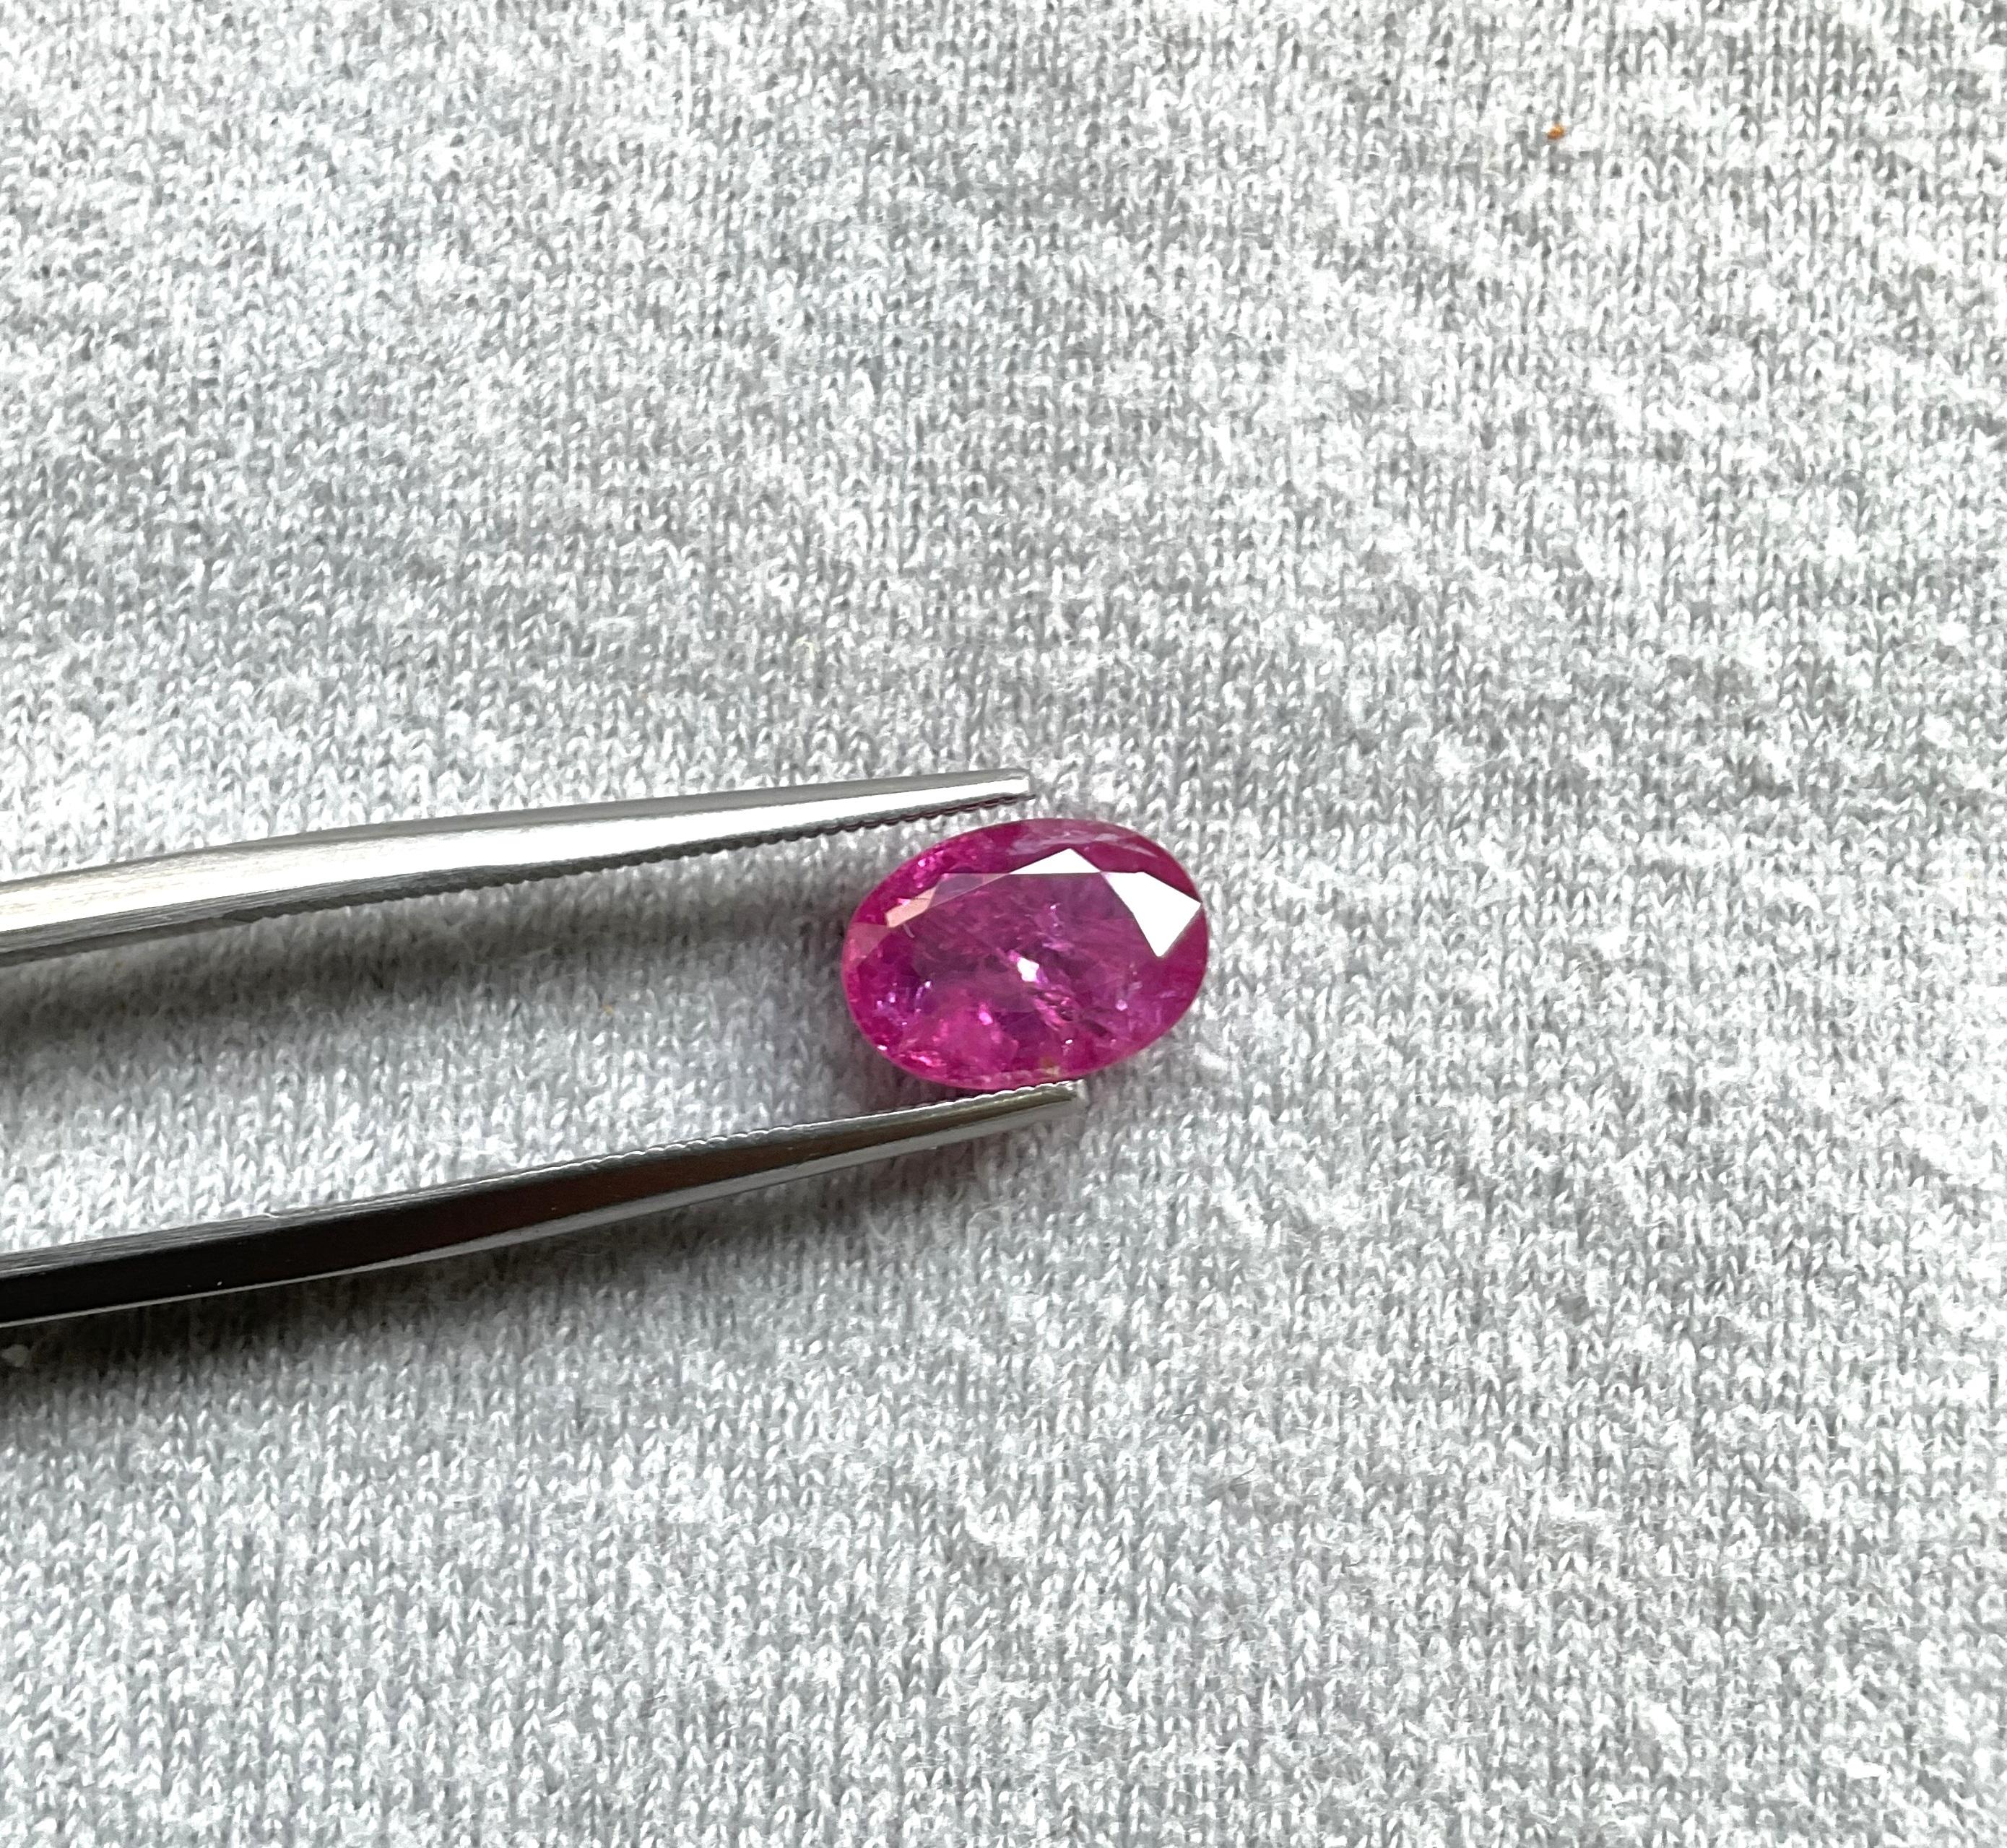 As we are auction partners at Gemfields, we have sourced these rubies from winning auctions and had cut them in our in house manufacturing responsibly.

Weight: 1.93 Carats
Size: 9x6x3 MM
Pieces: 1
Shape: Faceted oval Cut stone